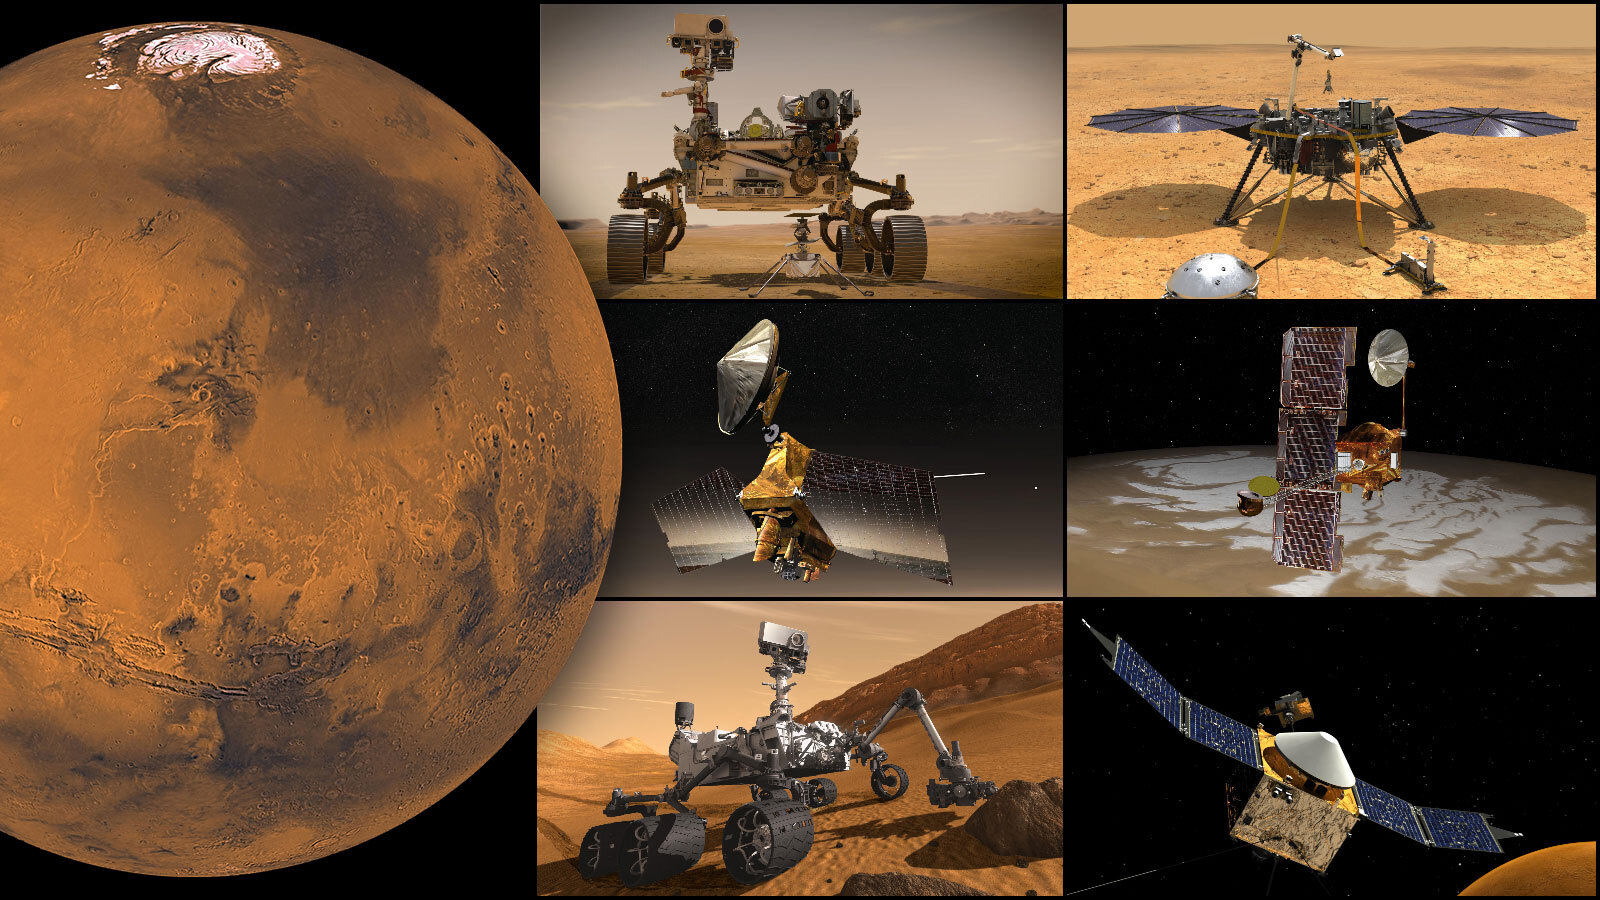 https://www.universetoday.com/wp-content/uploads/2021/10/9051_1-PIA24838-Collage_of_NASAs_Mars_Missions.jpg